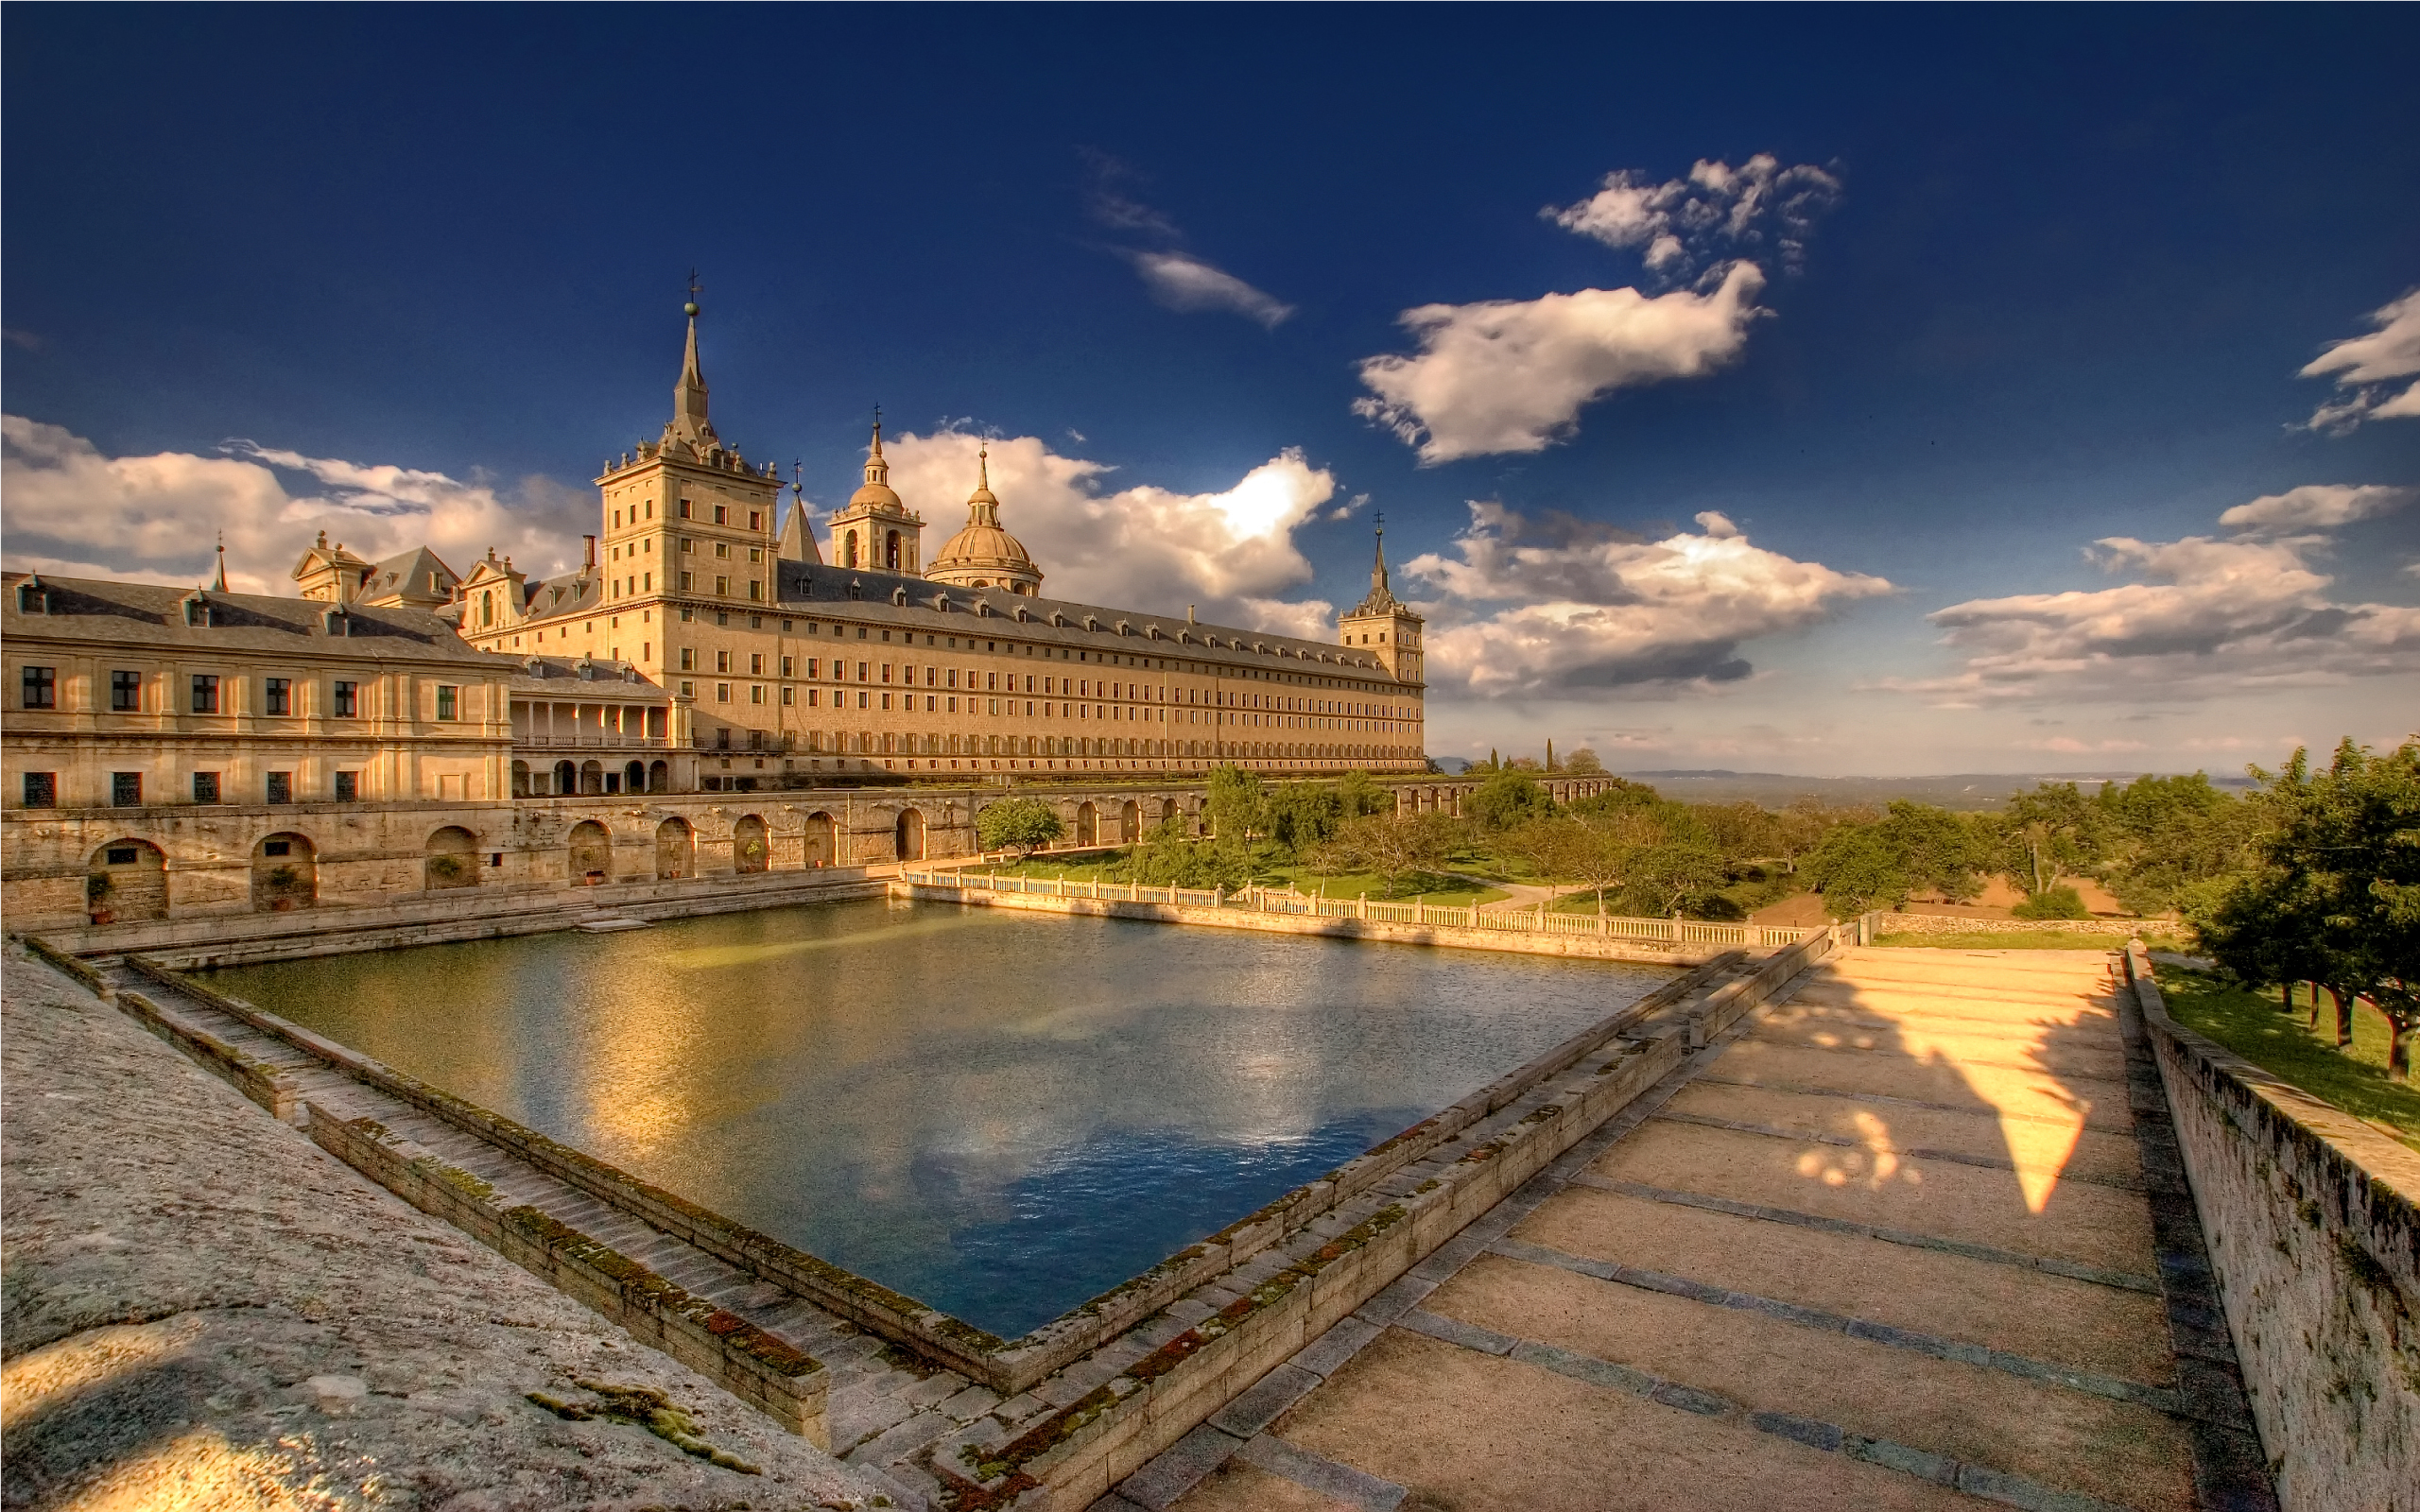  El Escorial is a historical residence of the king of Madrid, Spain